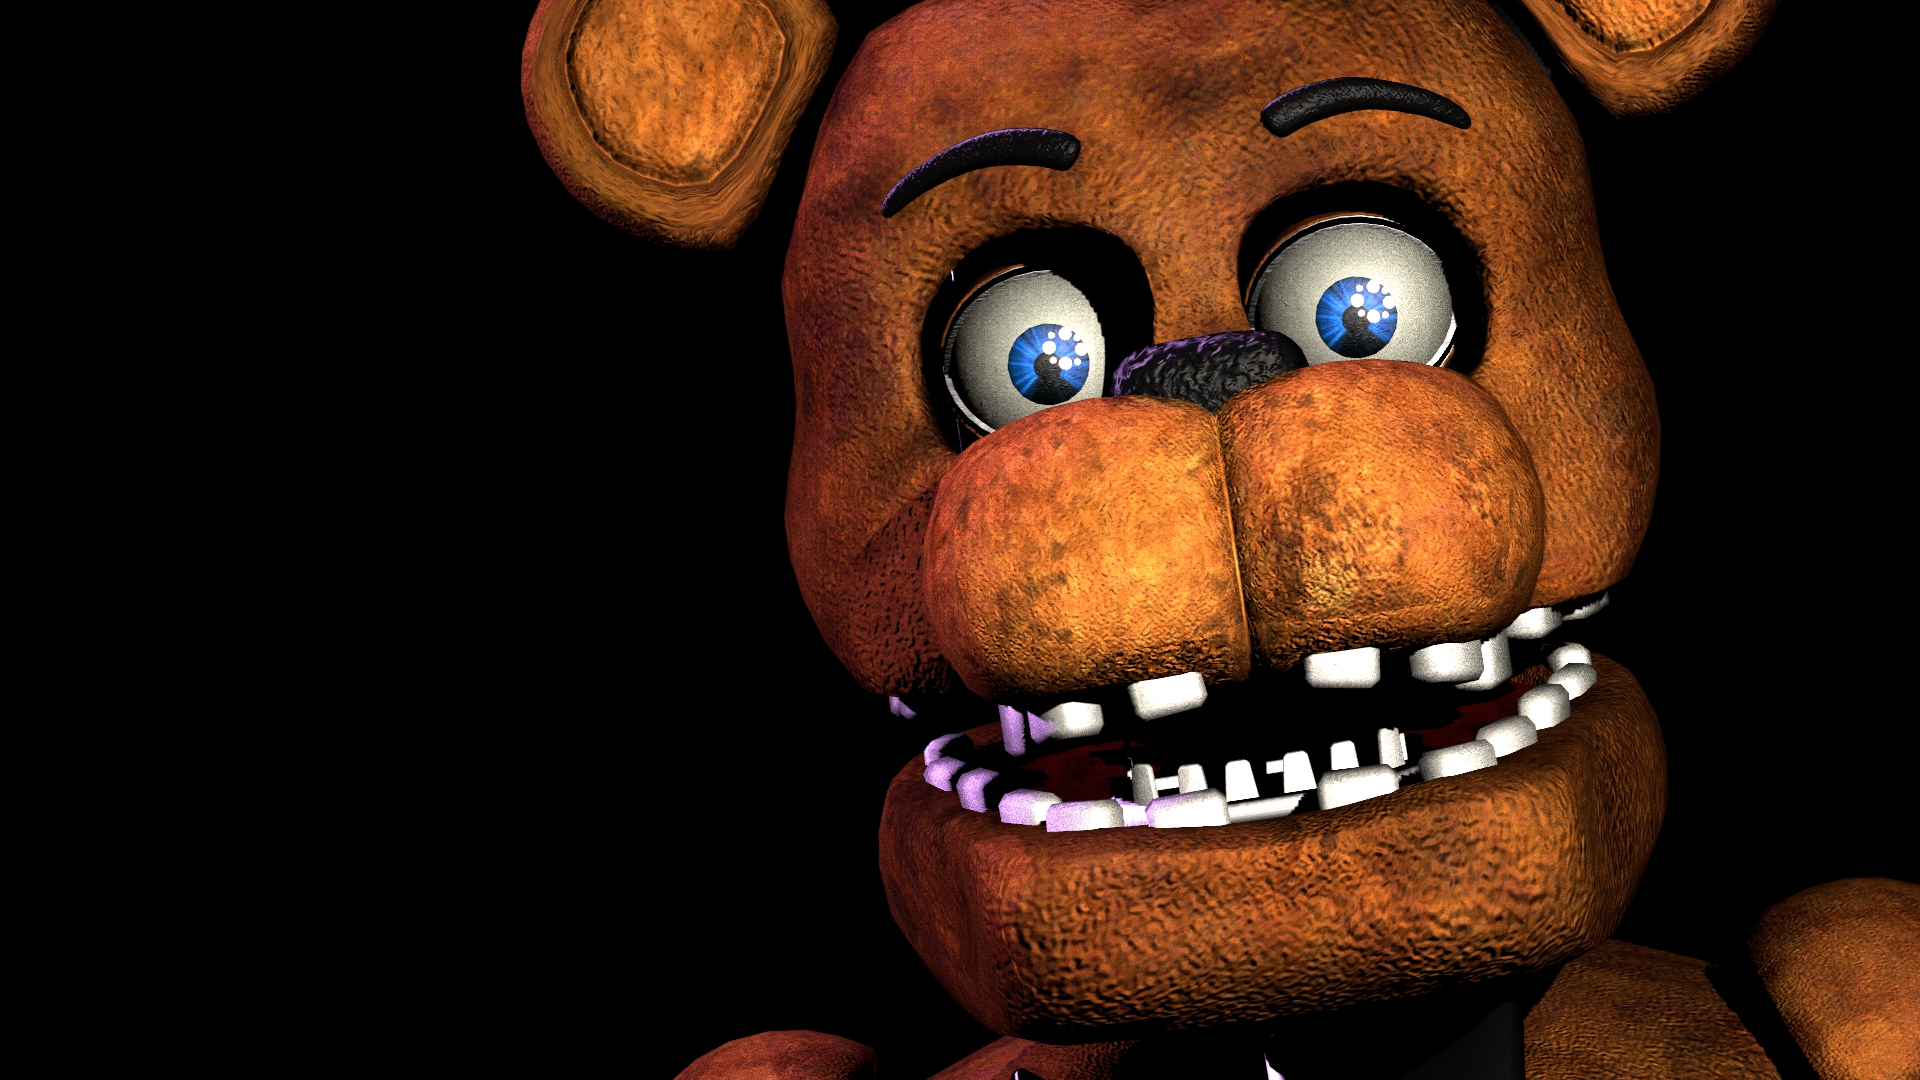 Withered Chica Jumpscare by RopeC4D1637 on DeviantArt